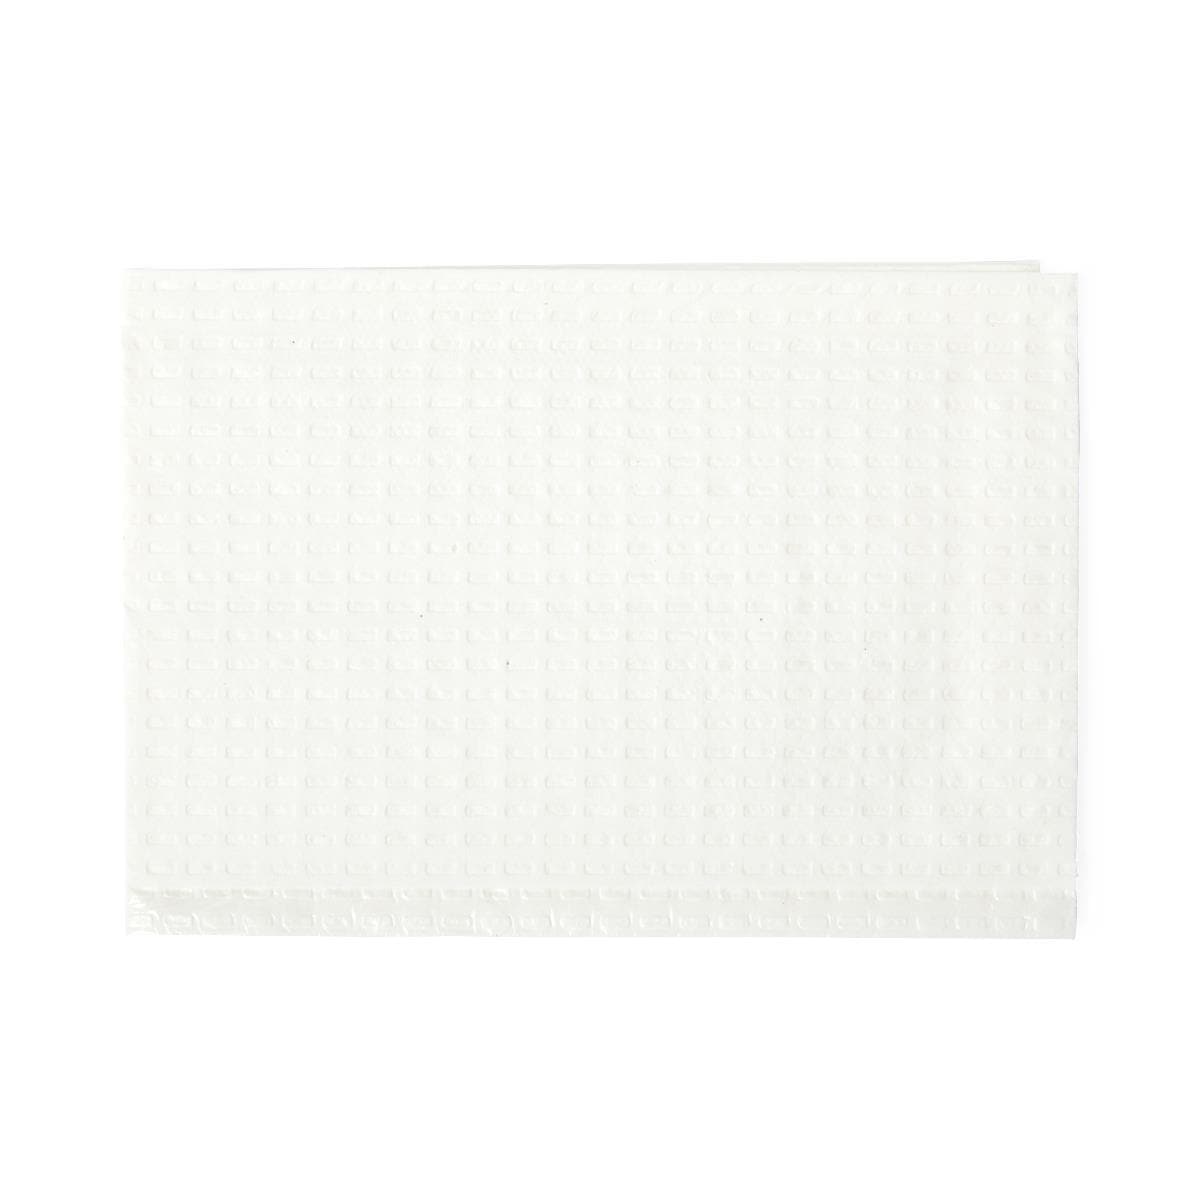 Medline Medline 2-Ply Tissue/Poly Professional Towels NON24356W